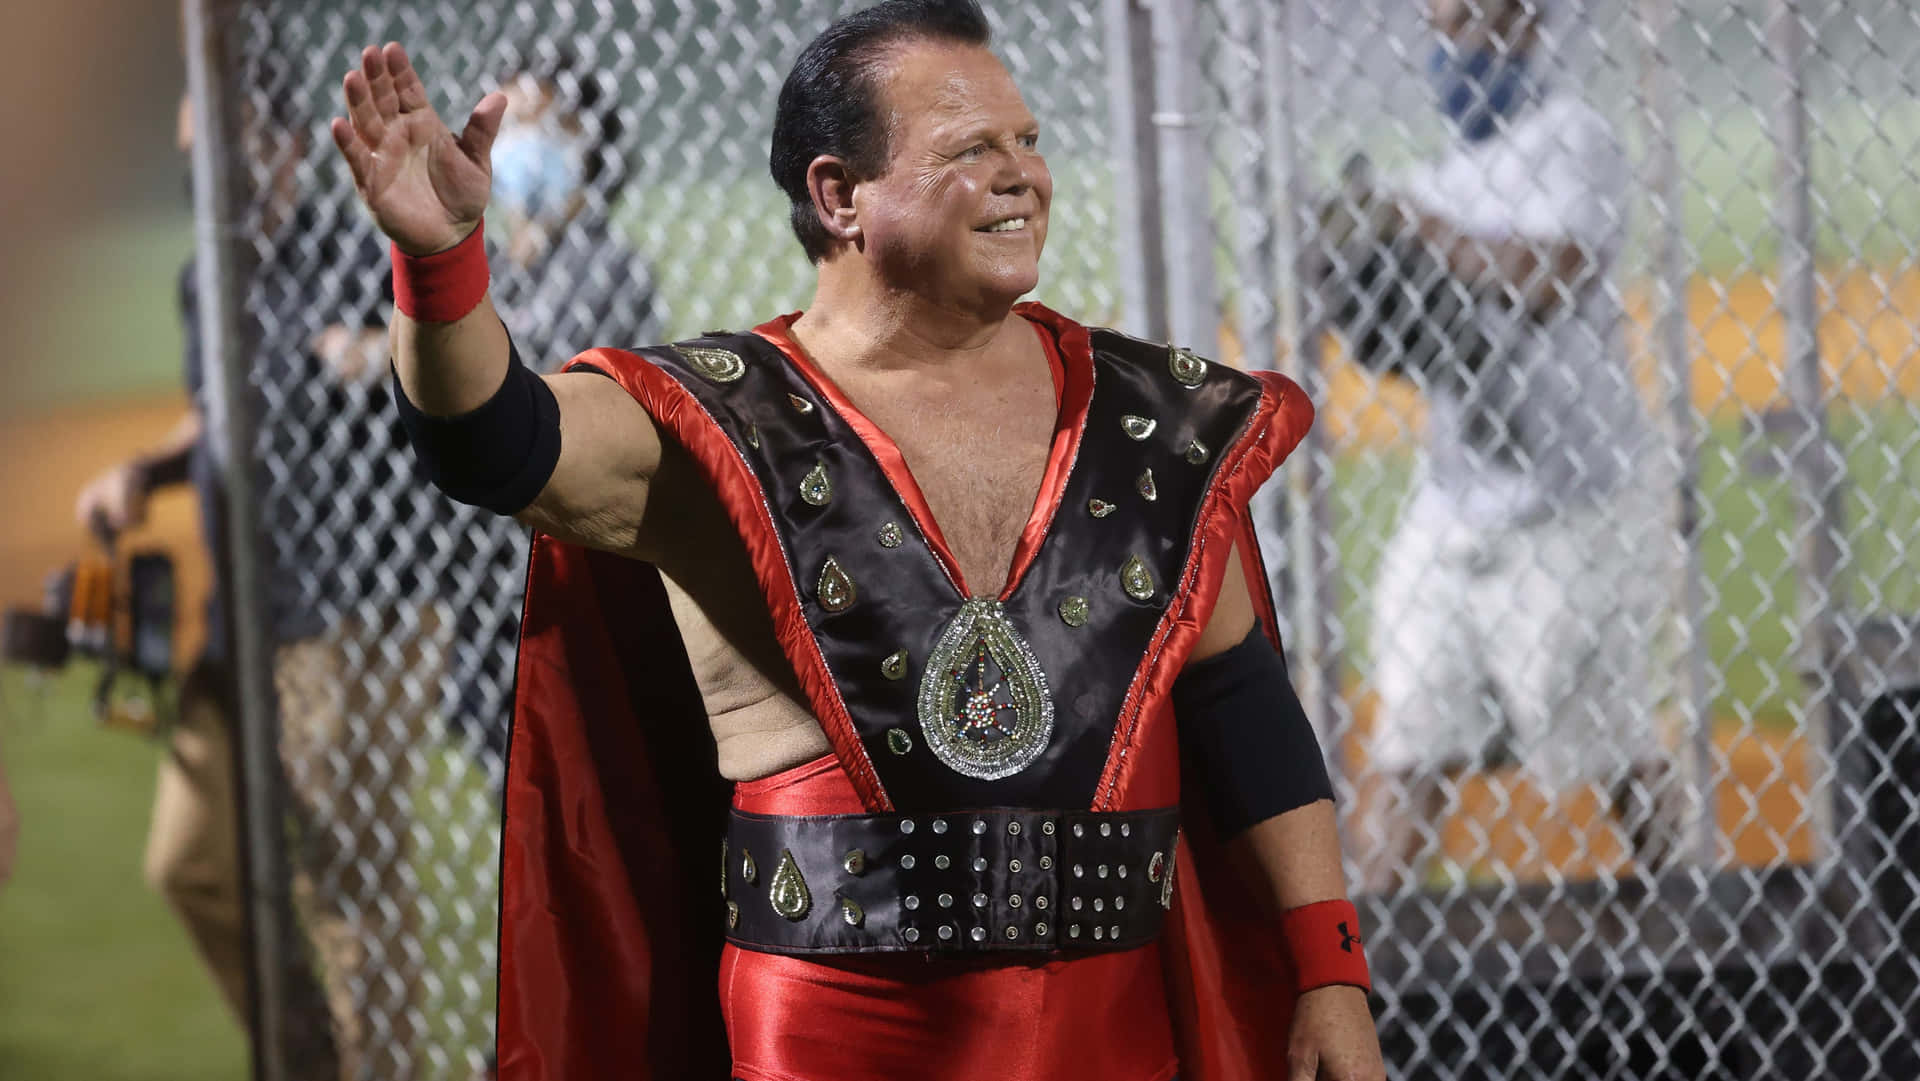 Jerry Lawler at his 50th Anniversary Celebration Wallpaper